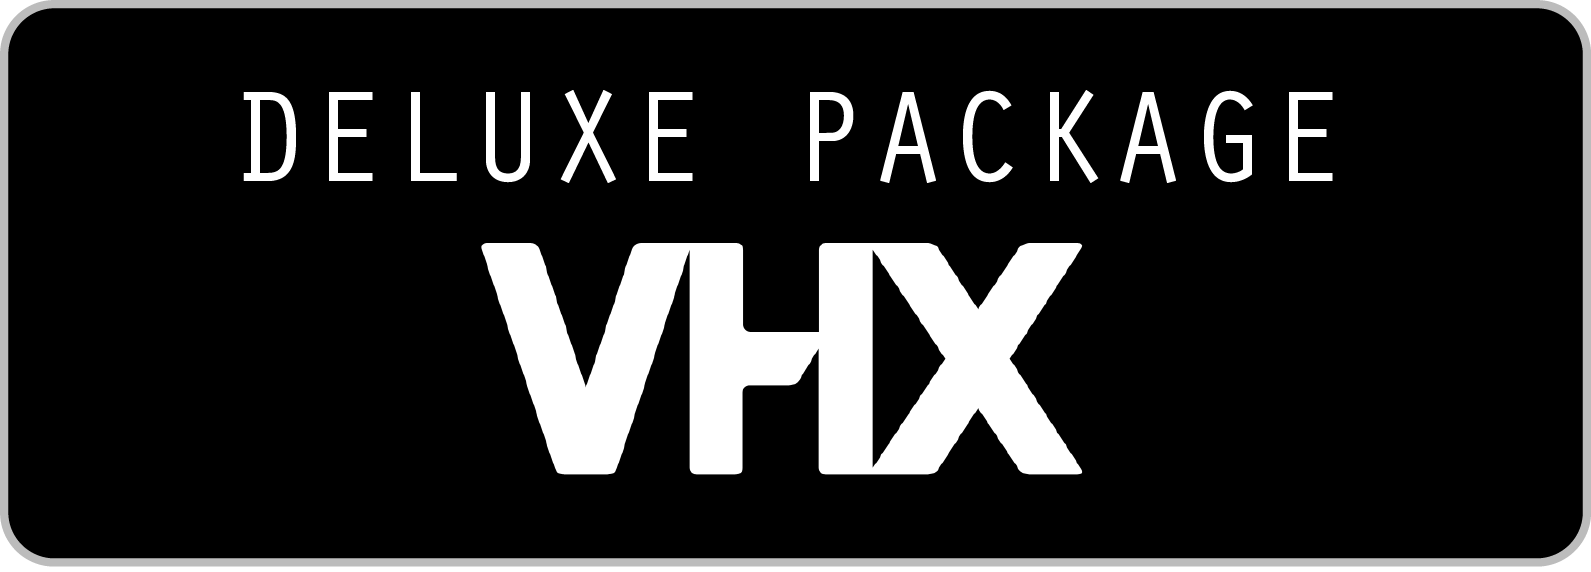 vhx deluxe package button